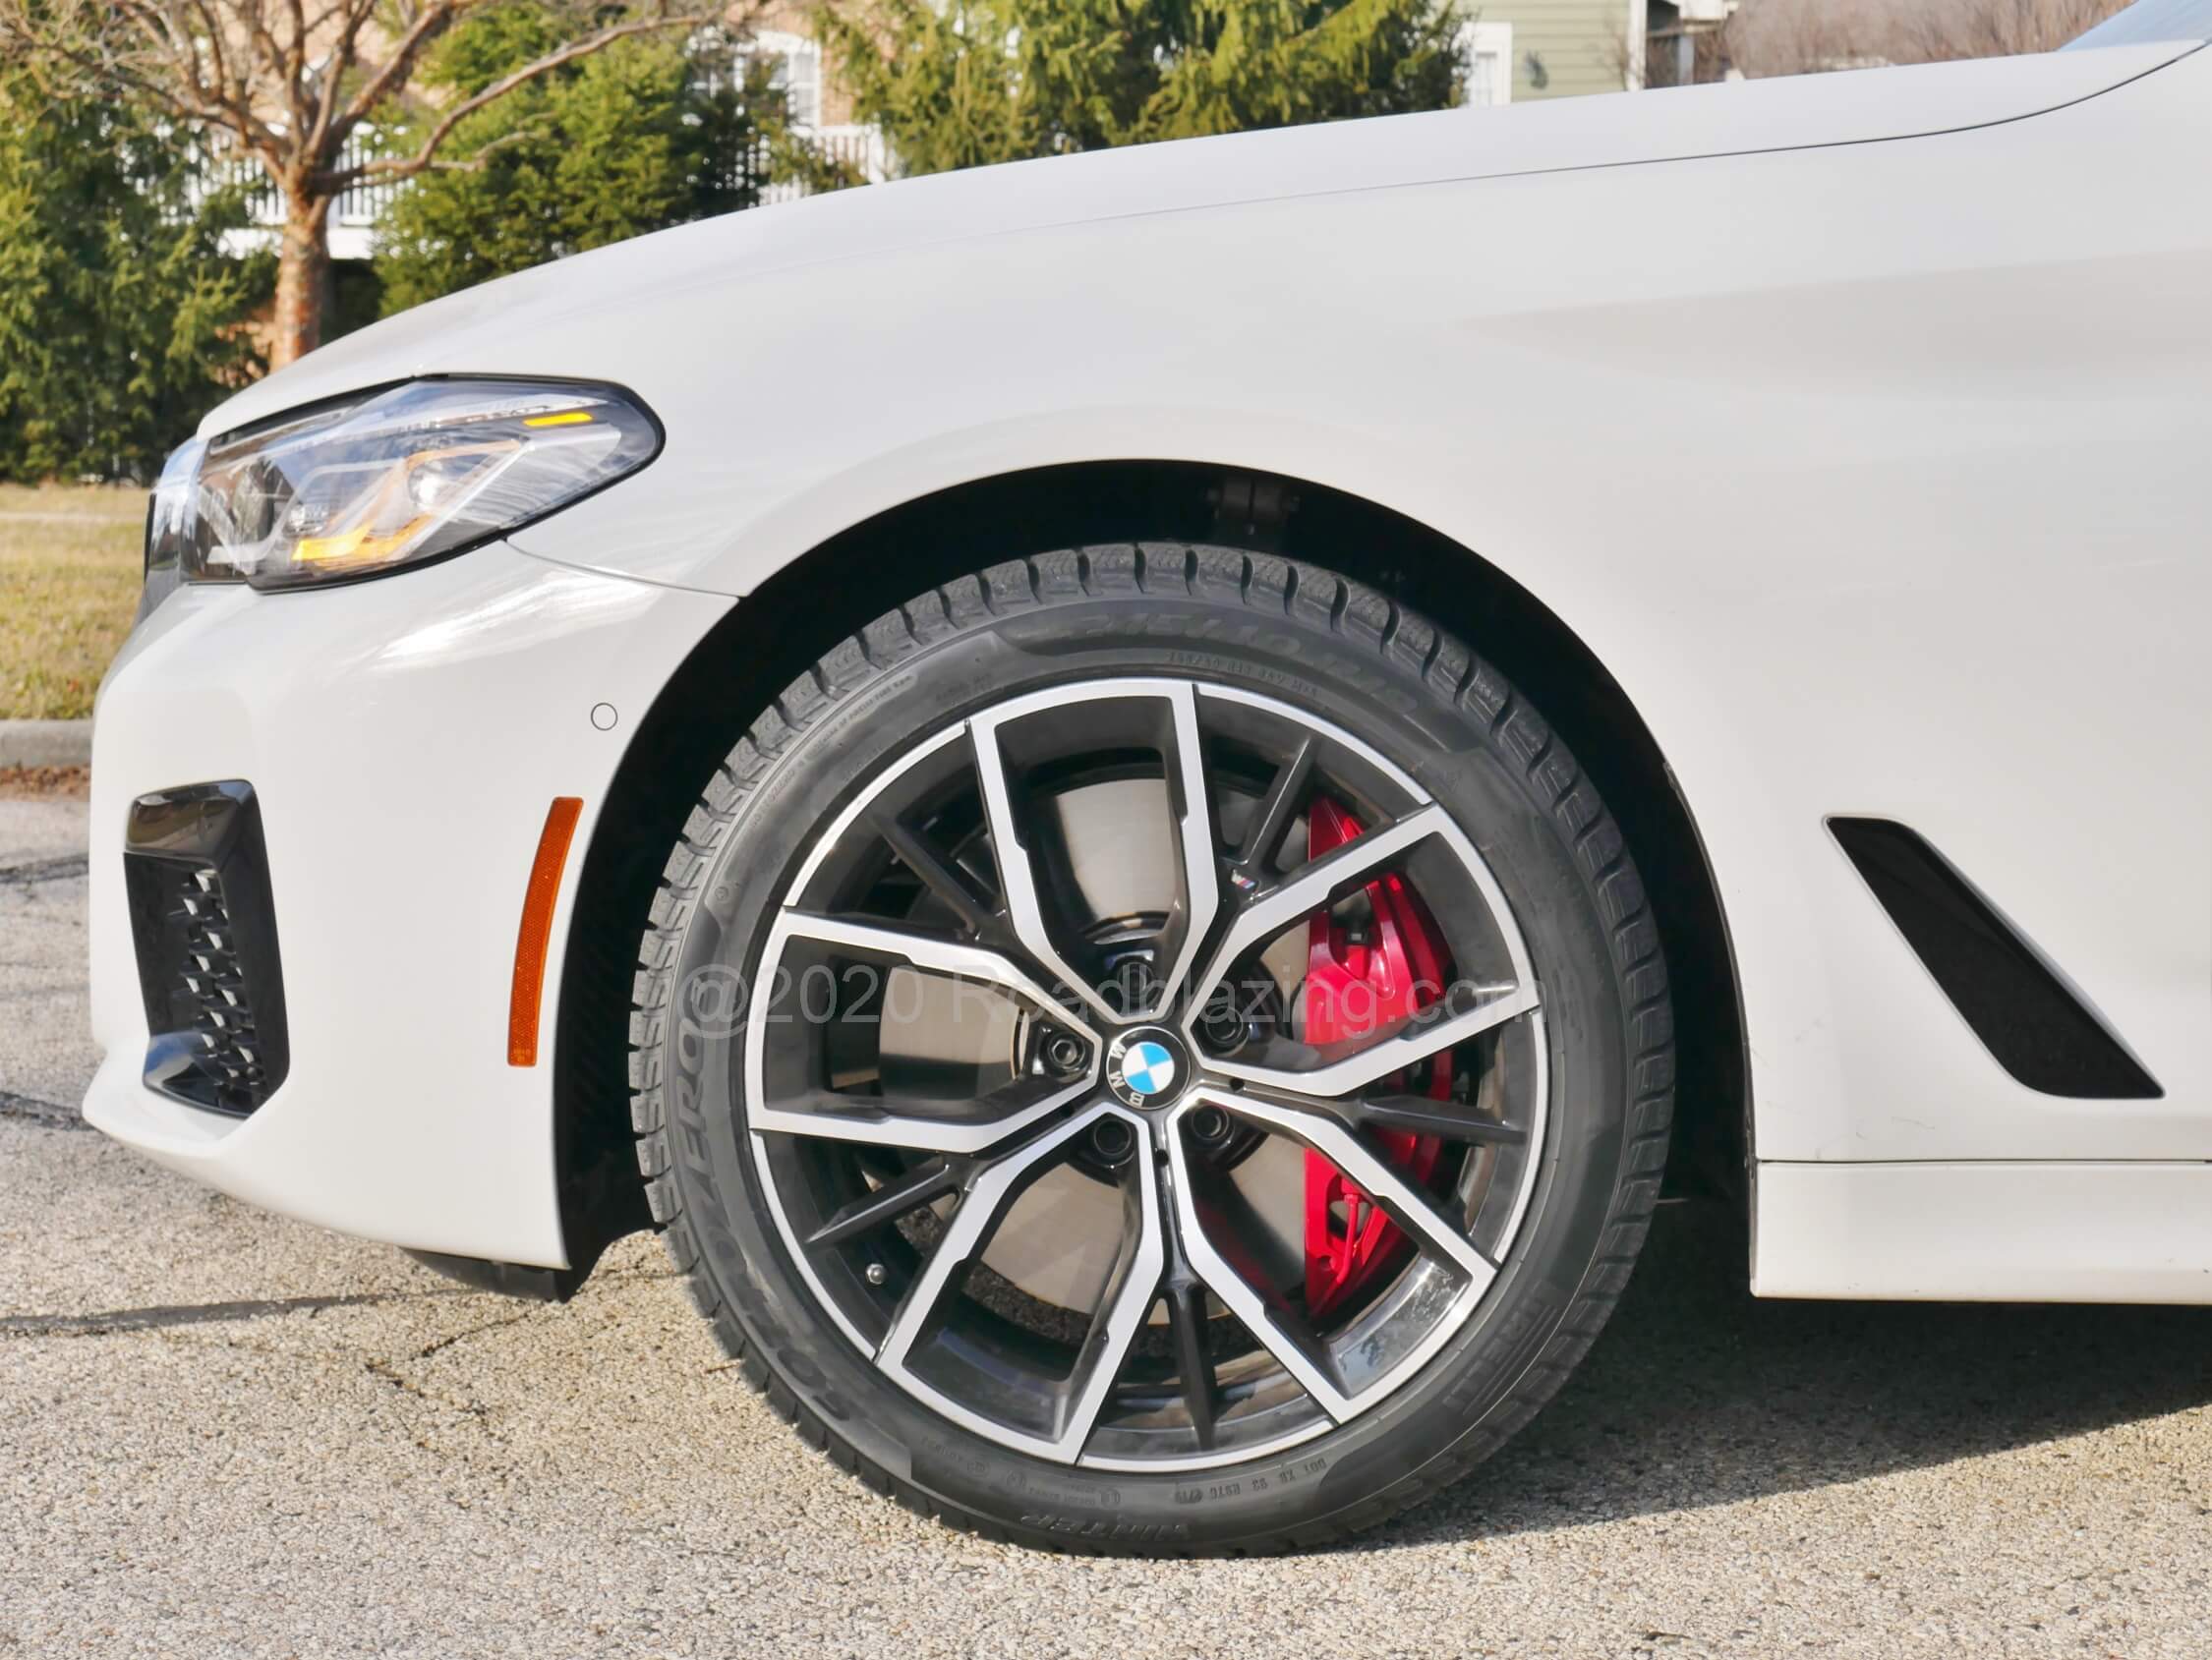 2021 BMW 540i xDrive: the test vehicle included optional active roll stabilization, e-variable damping, variable sport steering, 19" M alloy wheels and upgraded front multi-piston big brakes to improve driver to road connection and control